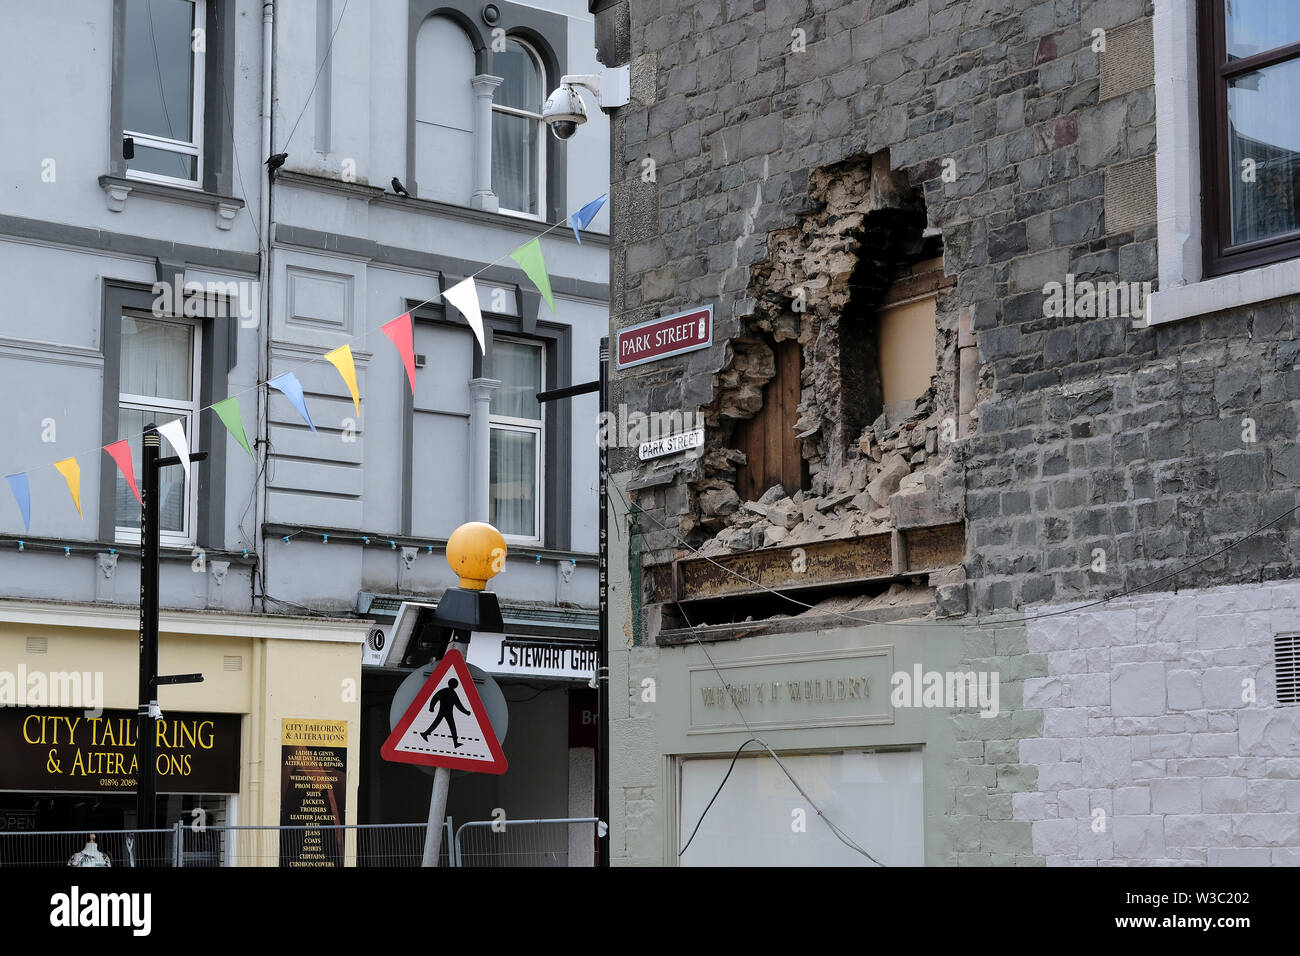 Galashiels, Scotland, UK. 14th July 2019.     Building Collapse, Galashiels The scene in Galashiels after part of an upper floor house exterior wall collapsed. A street in Galashiels town centre is currently closed after part of a building collapsed. The incident happened in Park Street this morning (Sunday). No one was injured.  Credit: Rob Gray/Alamy Live News Stock Photo